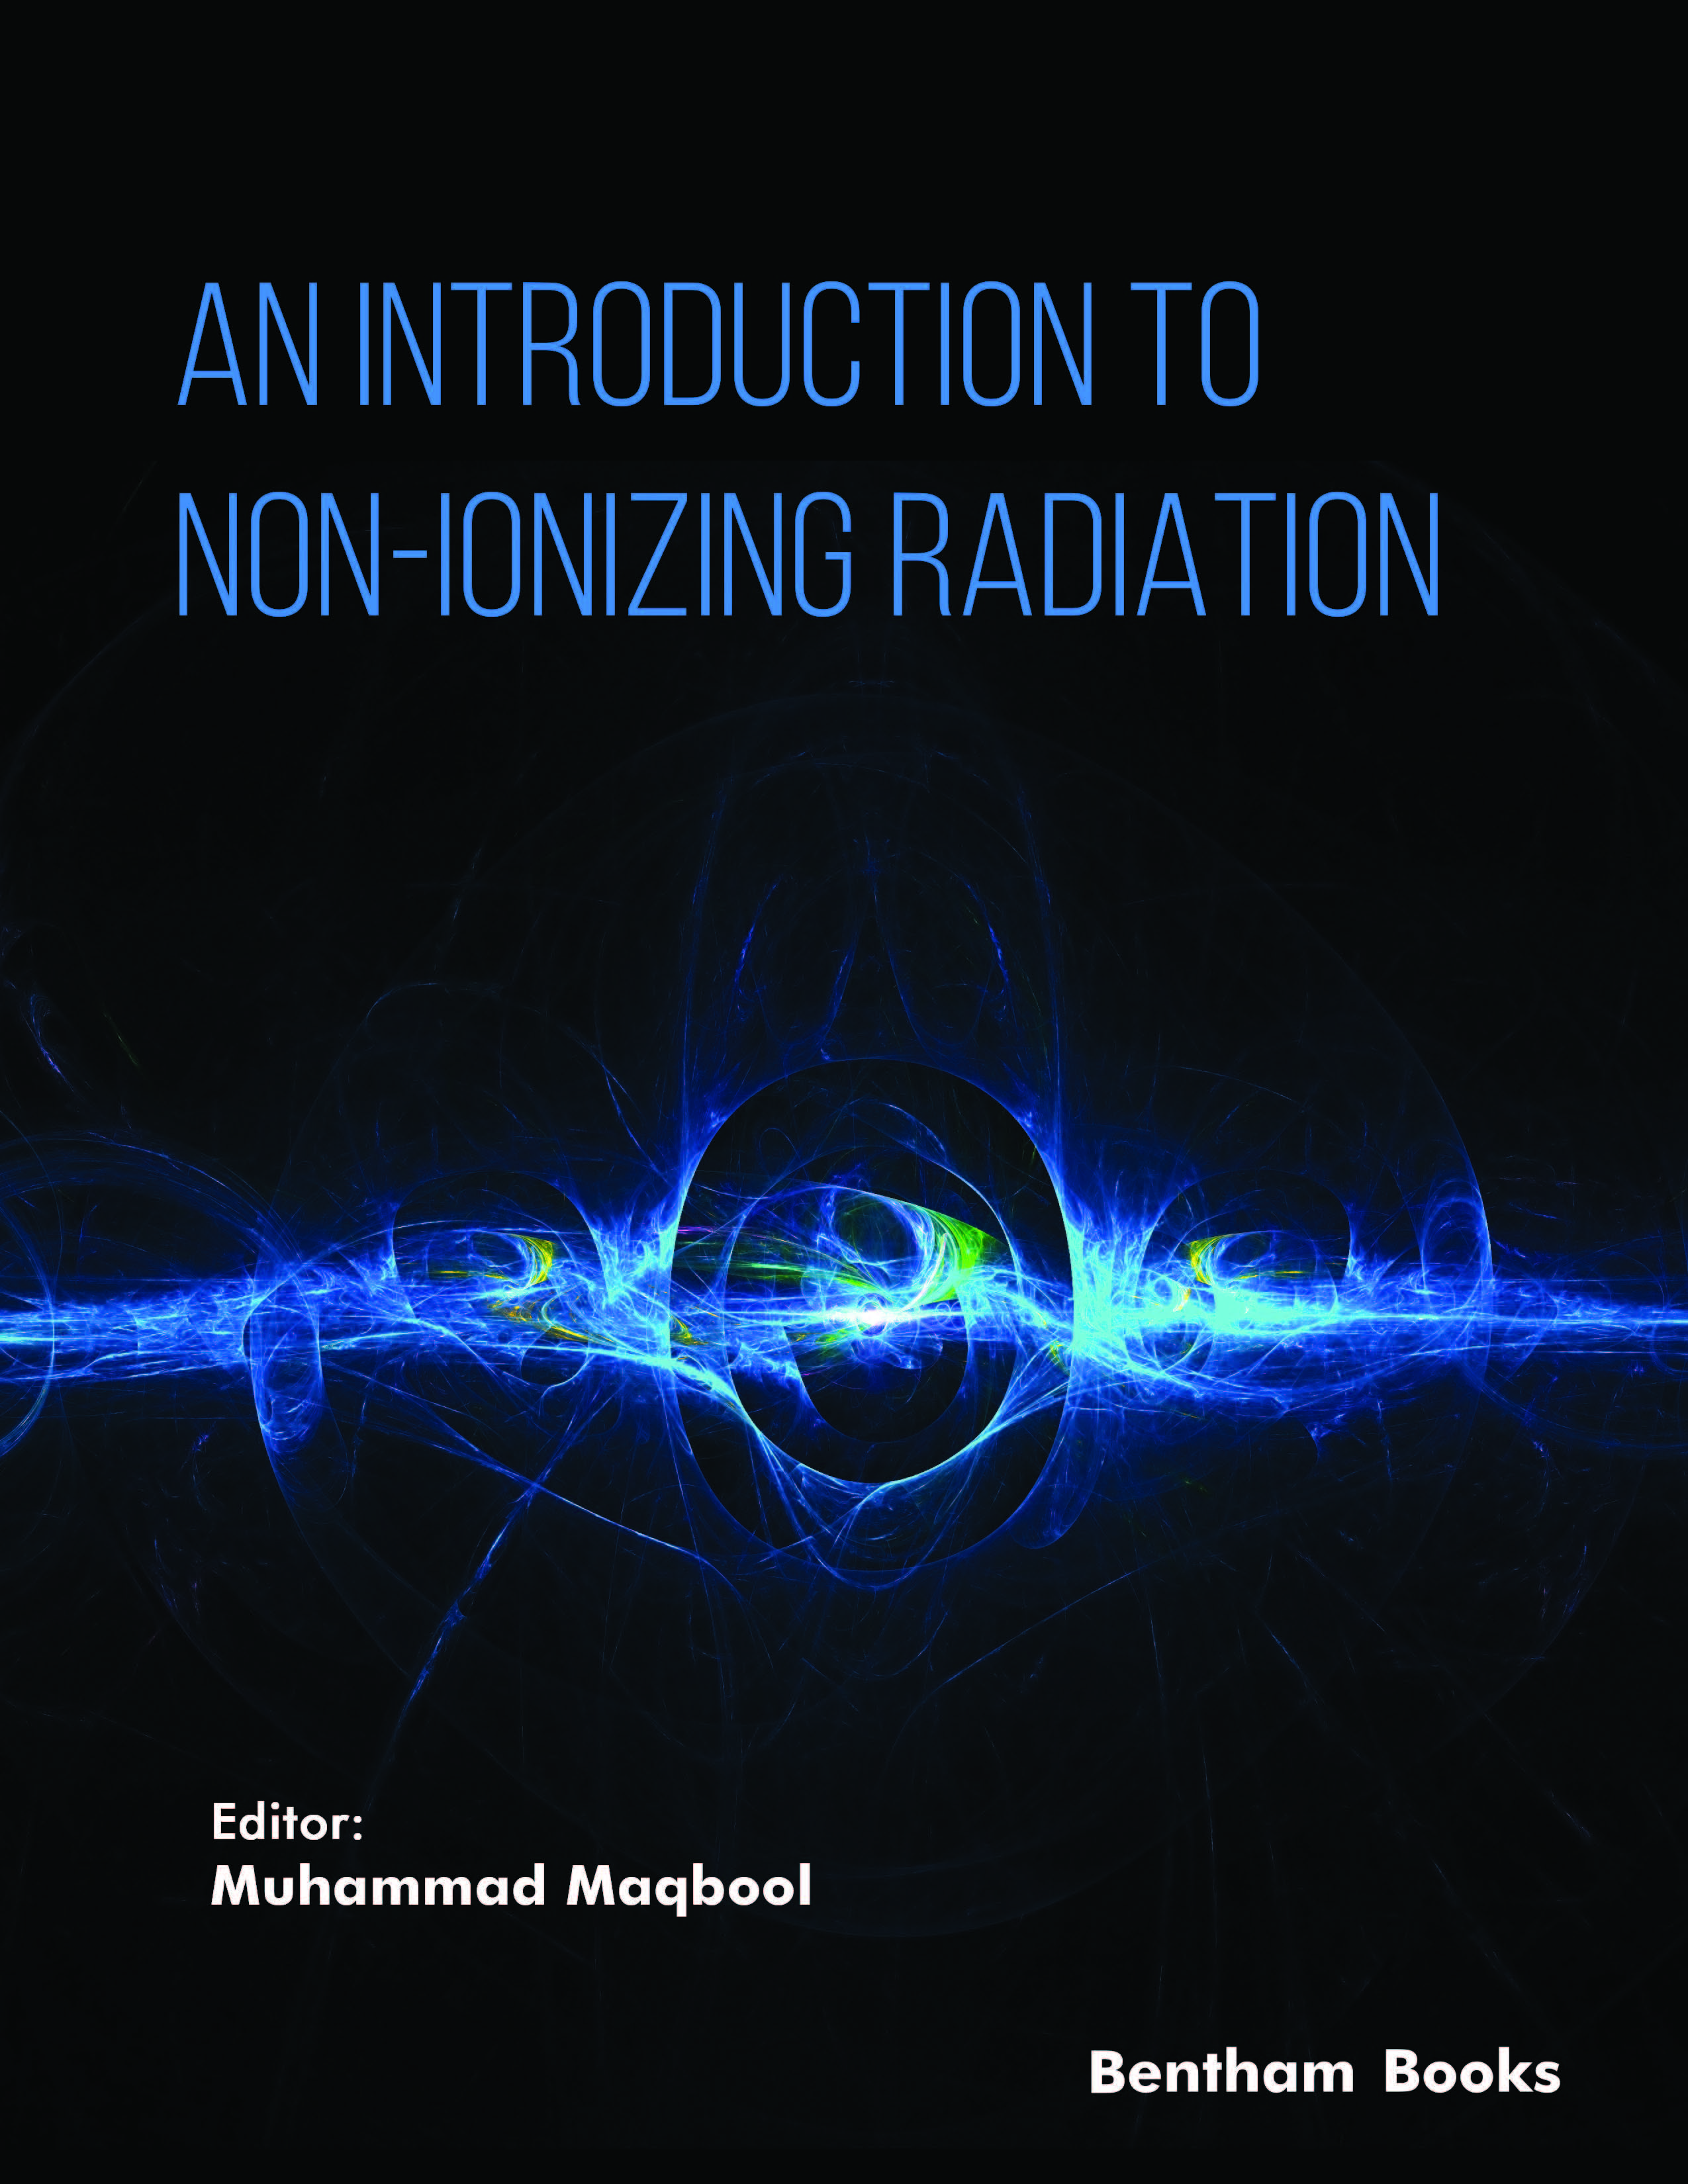 An Introduction to Non-Ionizing Radiation